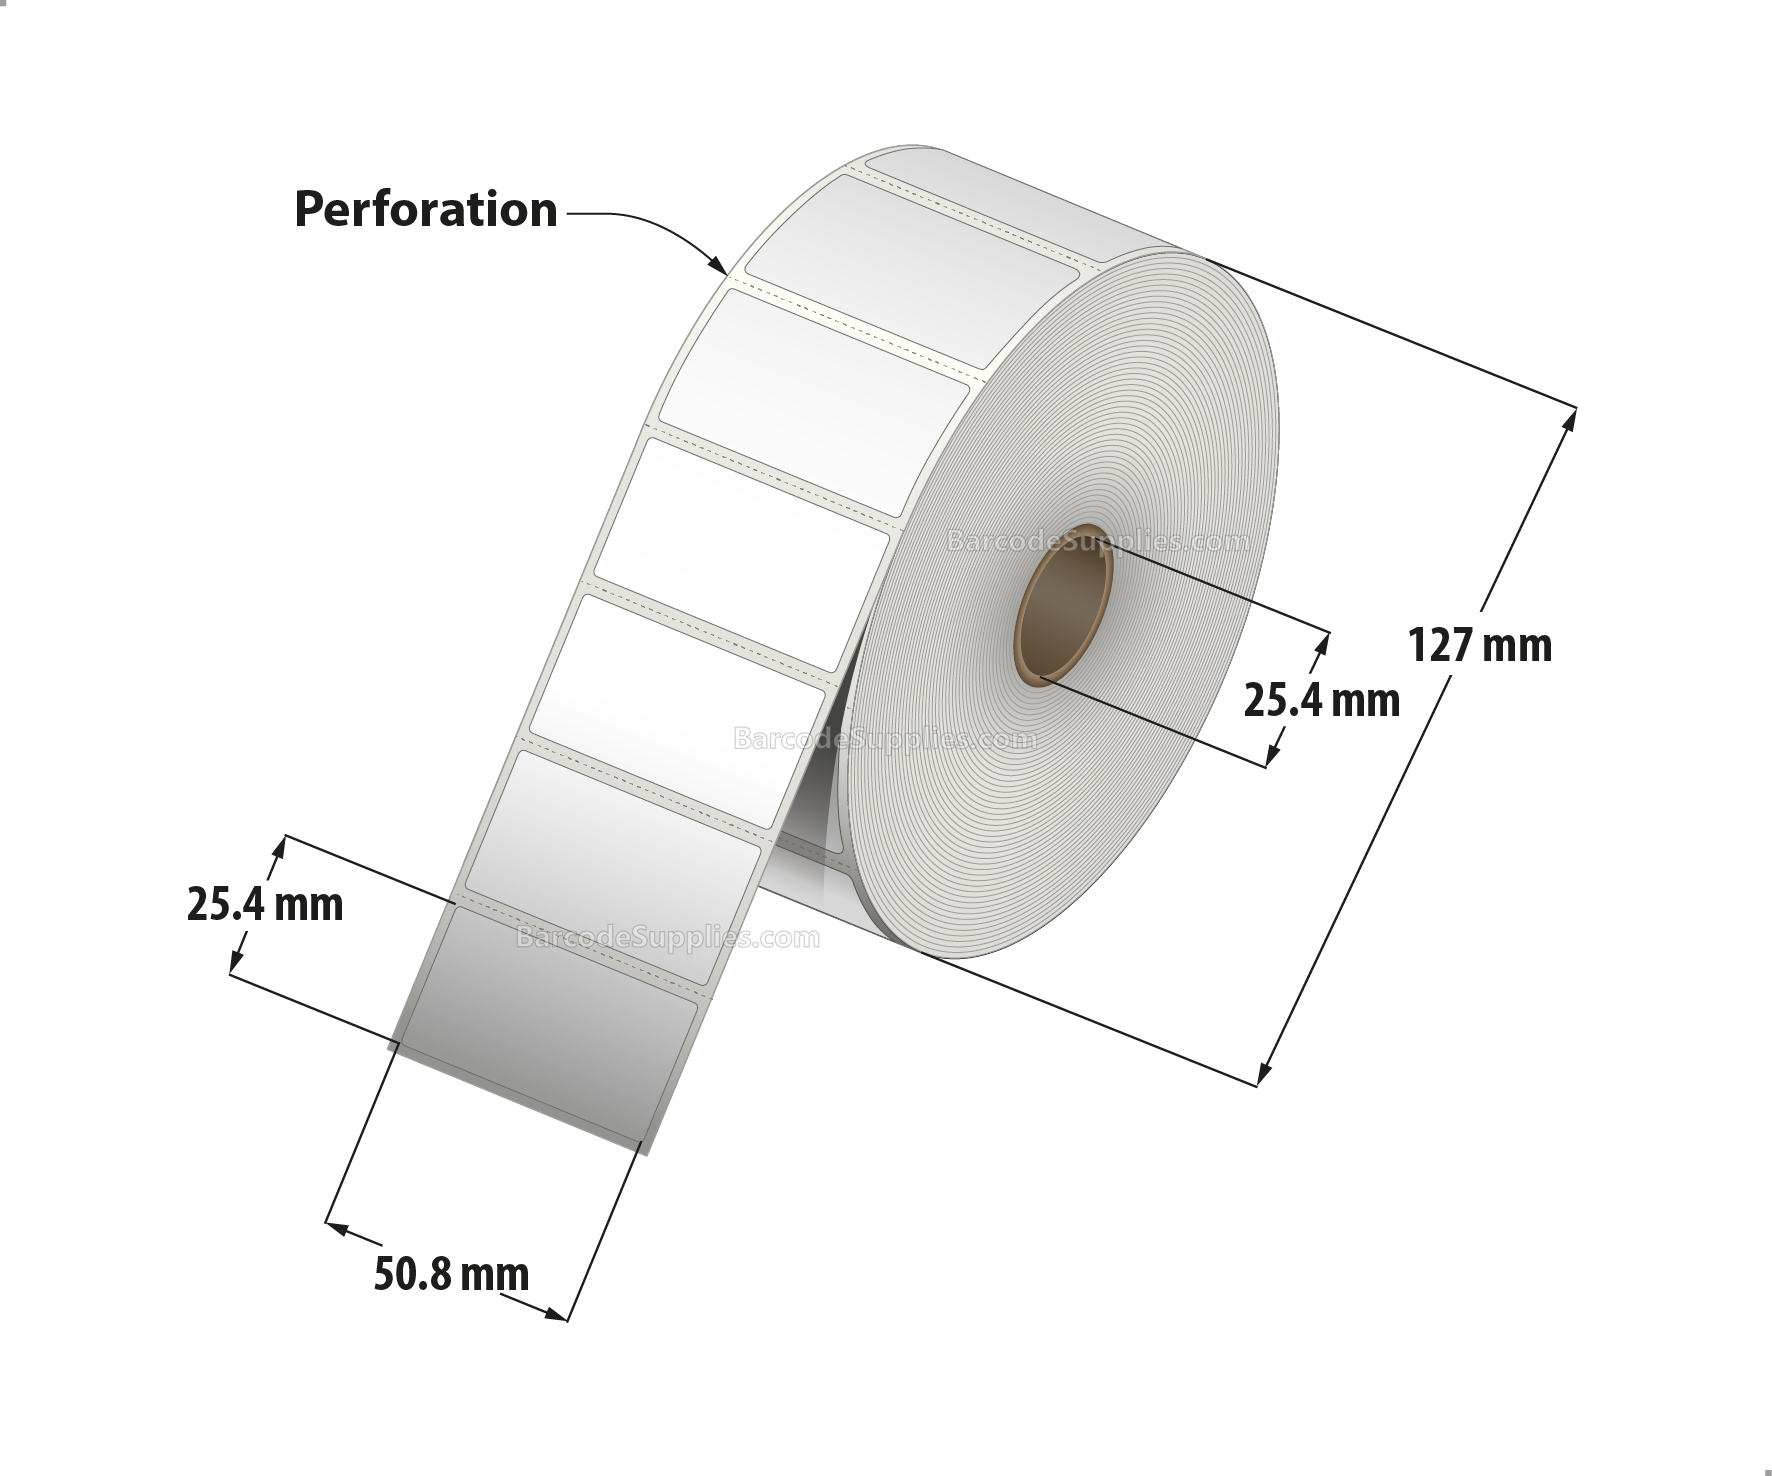 2 x 1 Direct Thermal White Labels With Rubber Adhesive - Perforated - 2340 Labels Per Roll - Carton Of 12 Rolls - 28080 Labels Total - MPN: RDT5-200100-1P